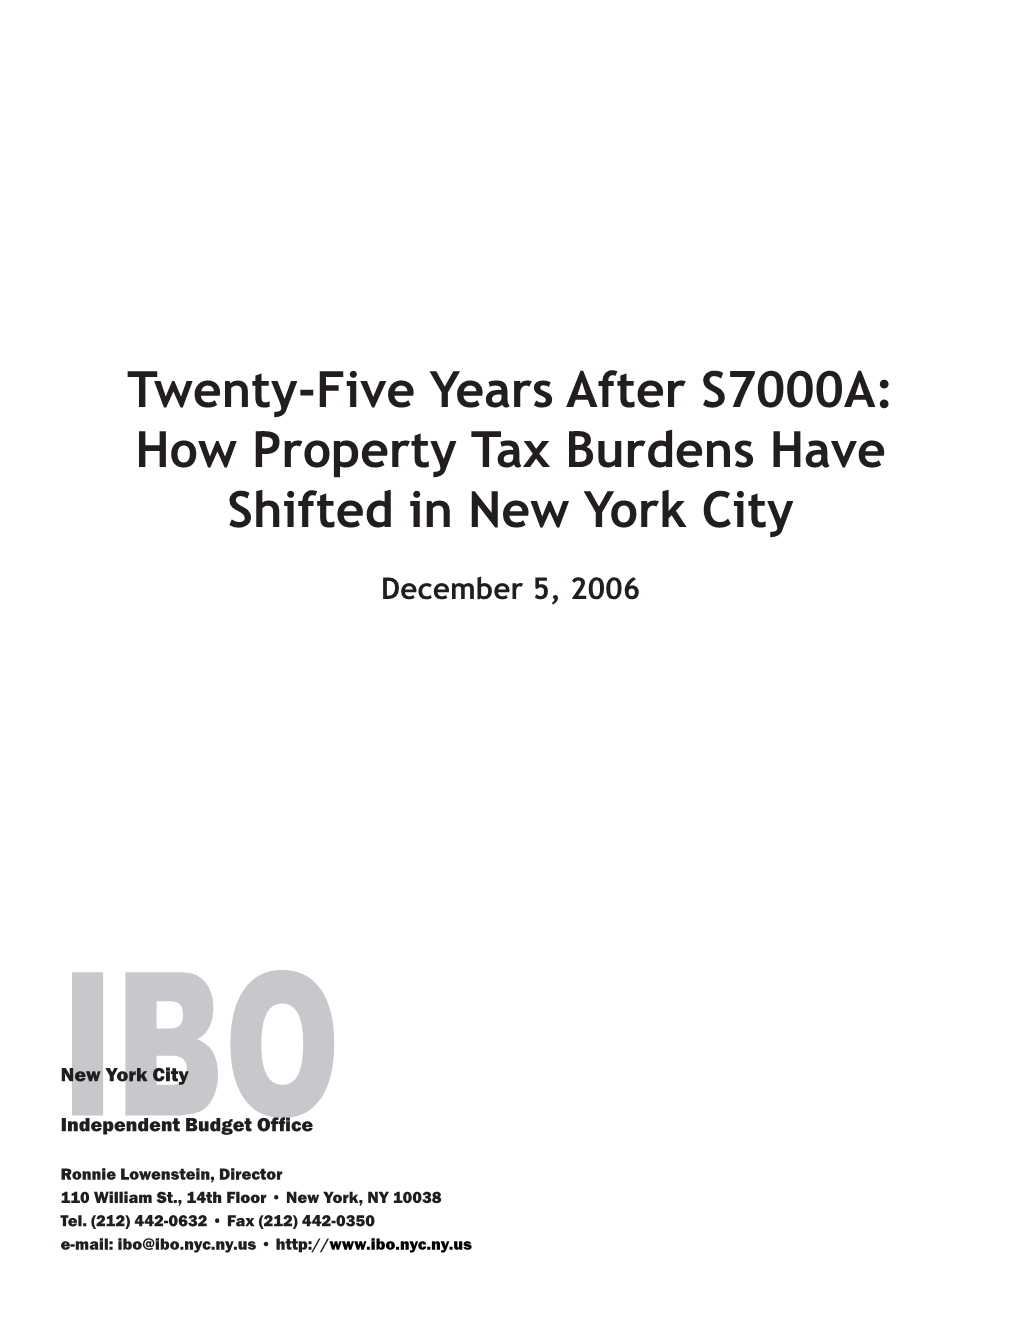 Twenty-Five Years After S7000A: How Property Tax Burdens Have Shifted in New York City